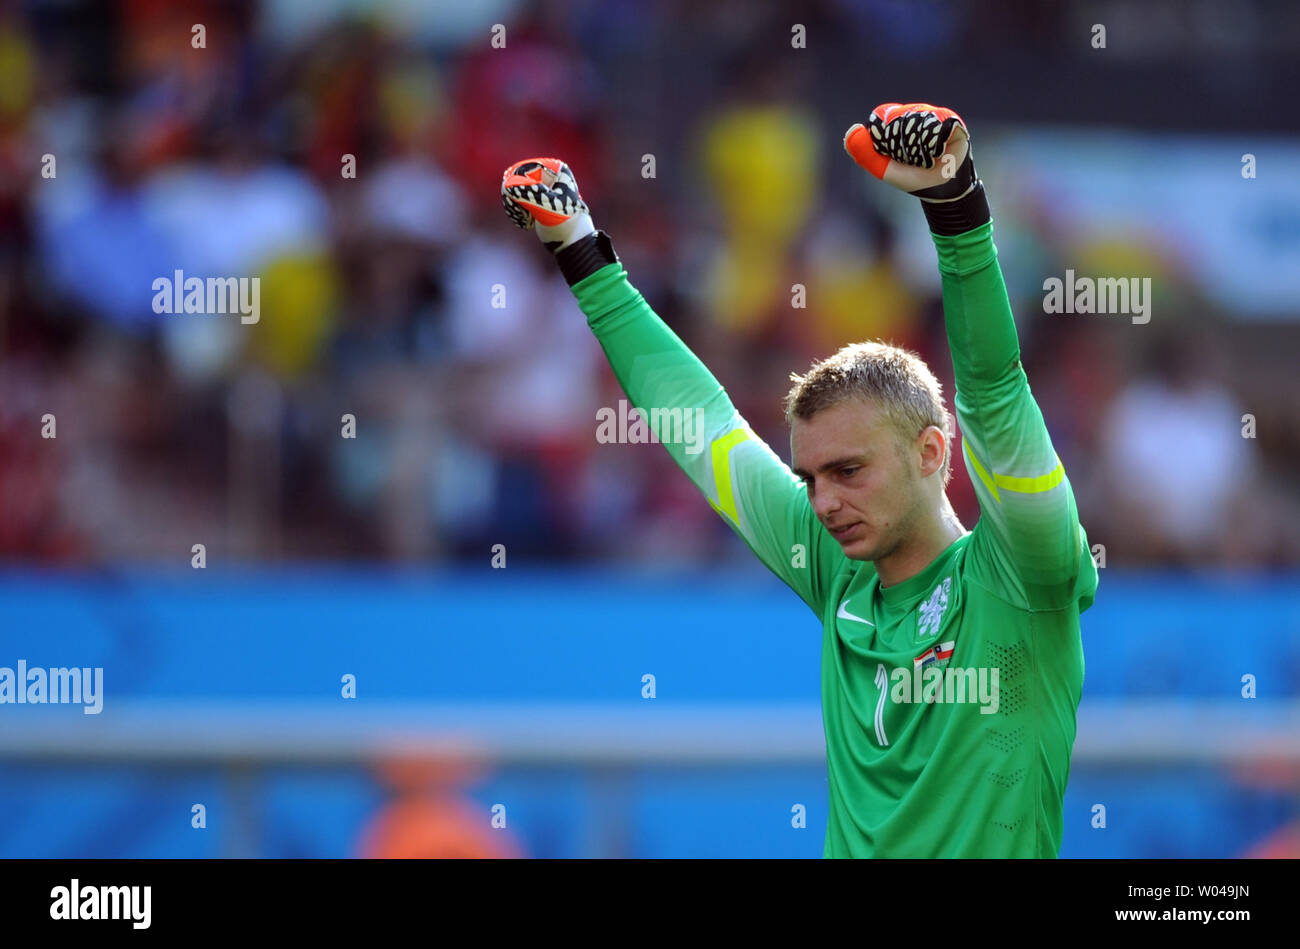 Jasper Cillessen of the Netherlands celebrates his side's first goal during the 2014 FIFA World Cup Group B match at the Arena Corinthians in Sao Paulo, Brazil on June 23, 2014. UPI/Chris Brunskill Stock Photo